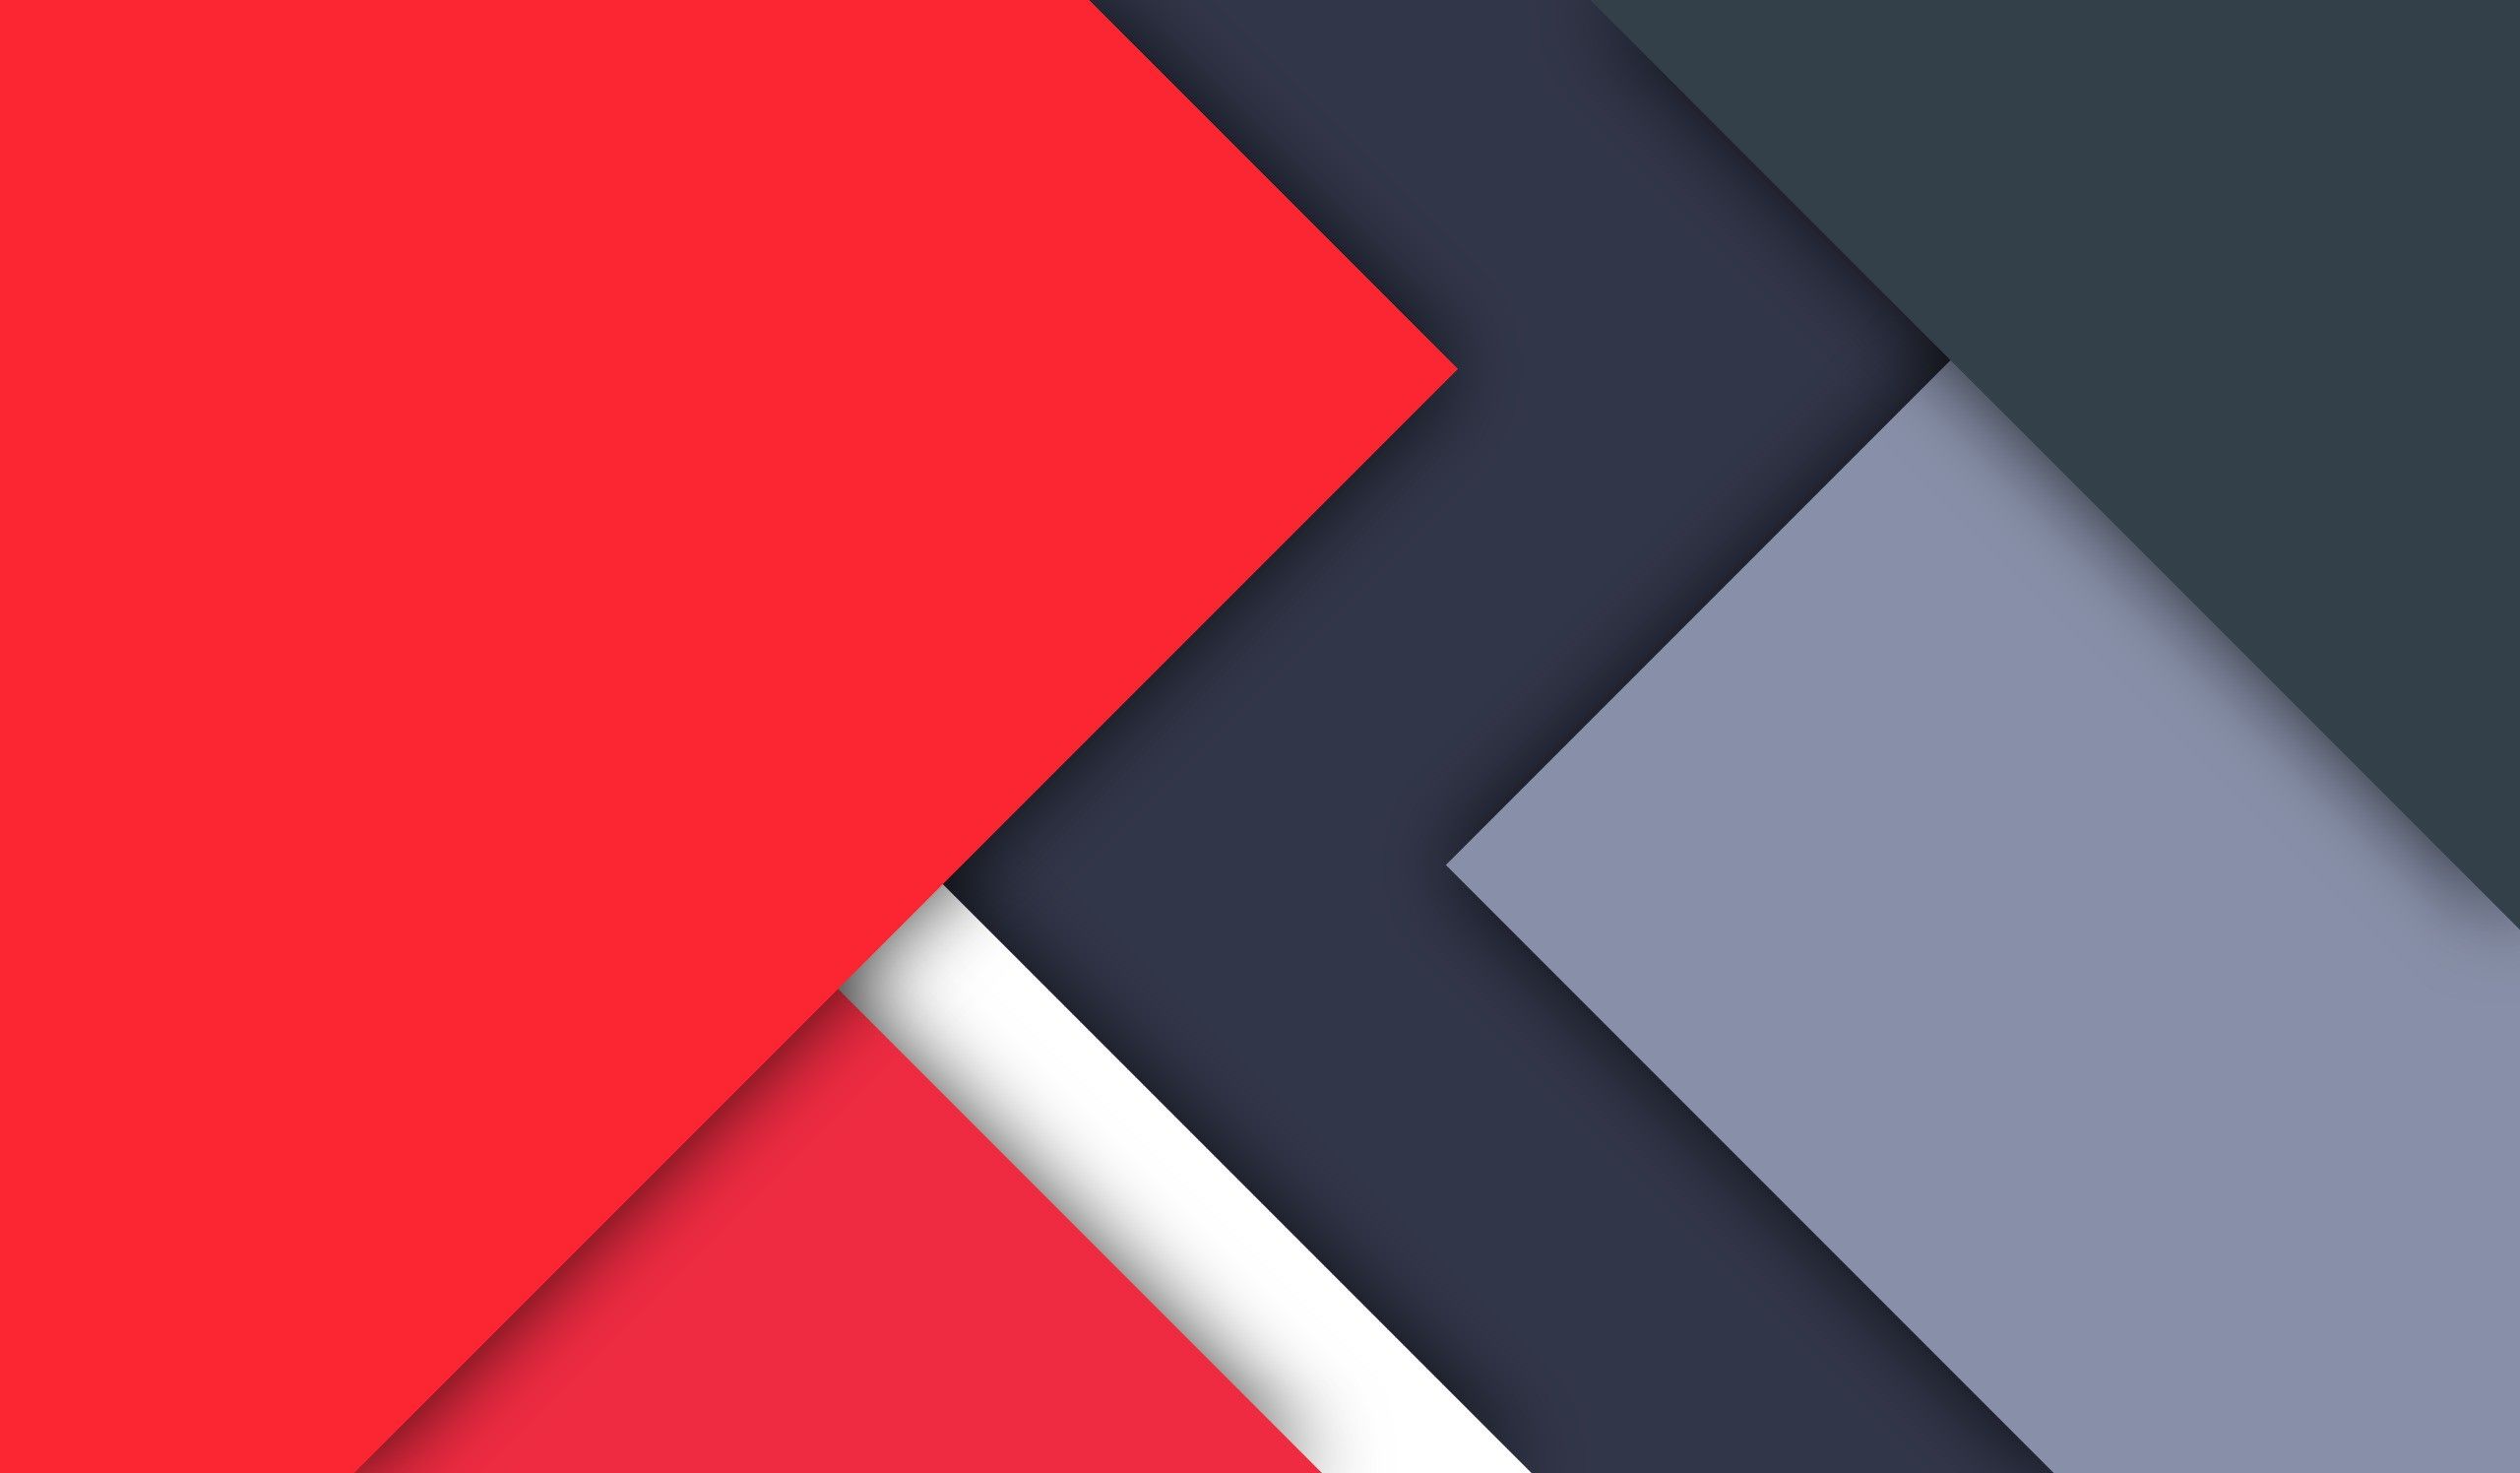 Red Geometric Shapes Wallpapers